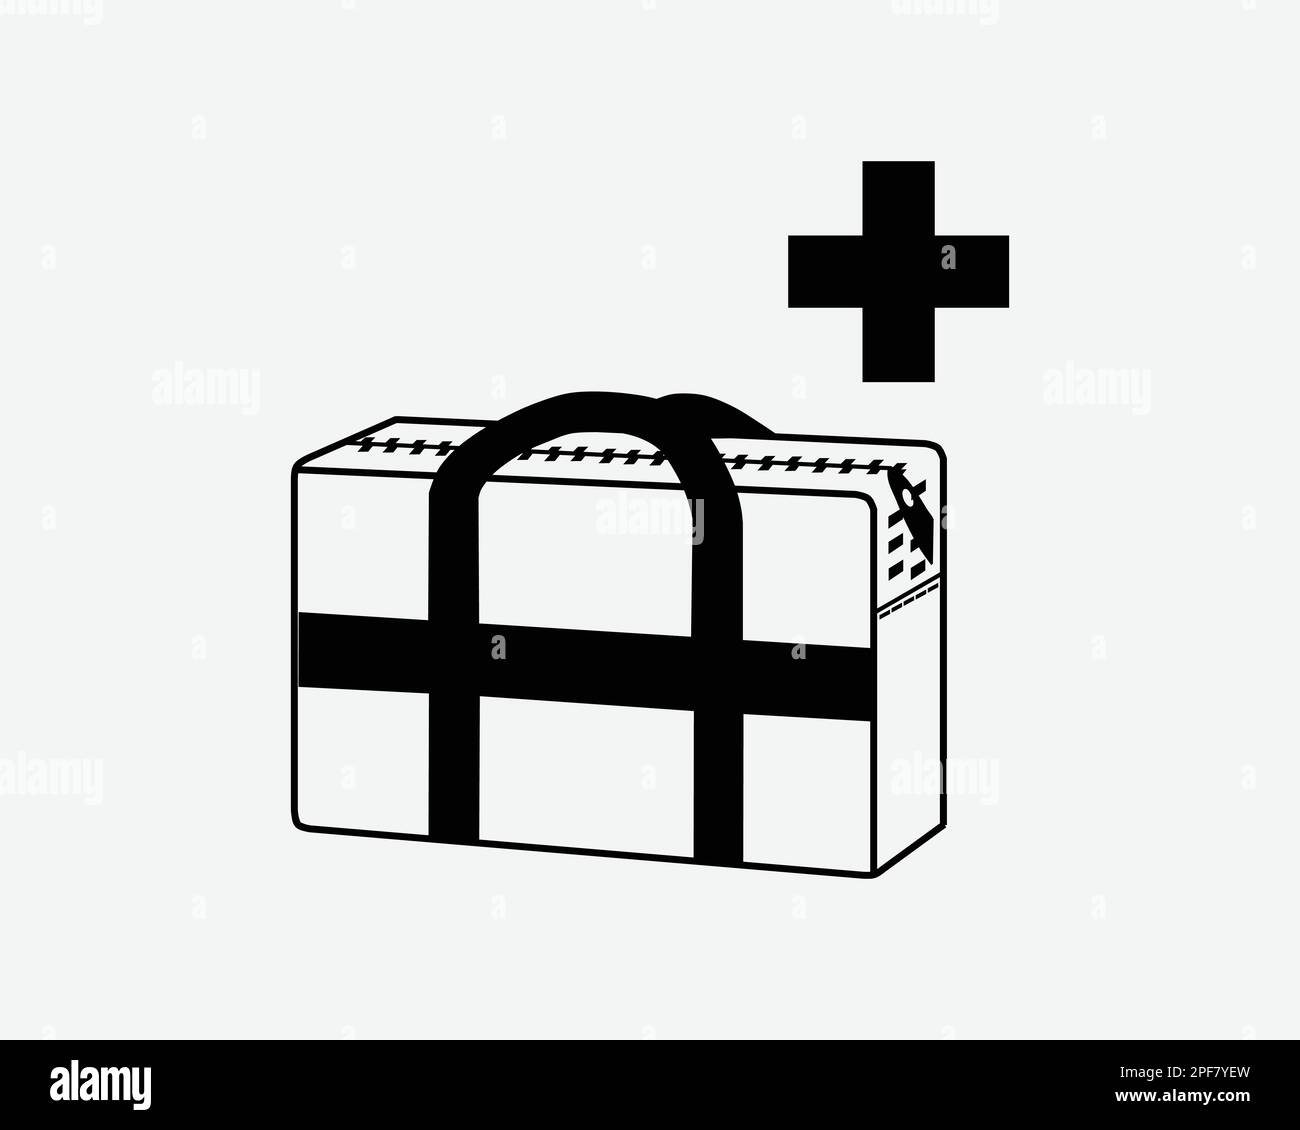 Medical Bag Medic Healthcare Supplies Carry First Aid Black White Silhouette Sign Symbol Icon Graphic Clipart Artwork Illustration Pictogram Vector Stock Vector